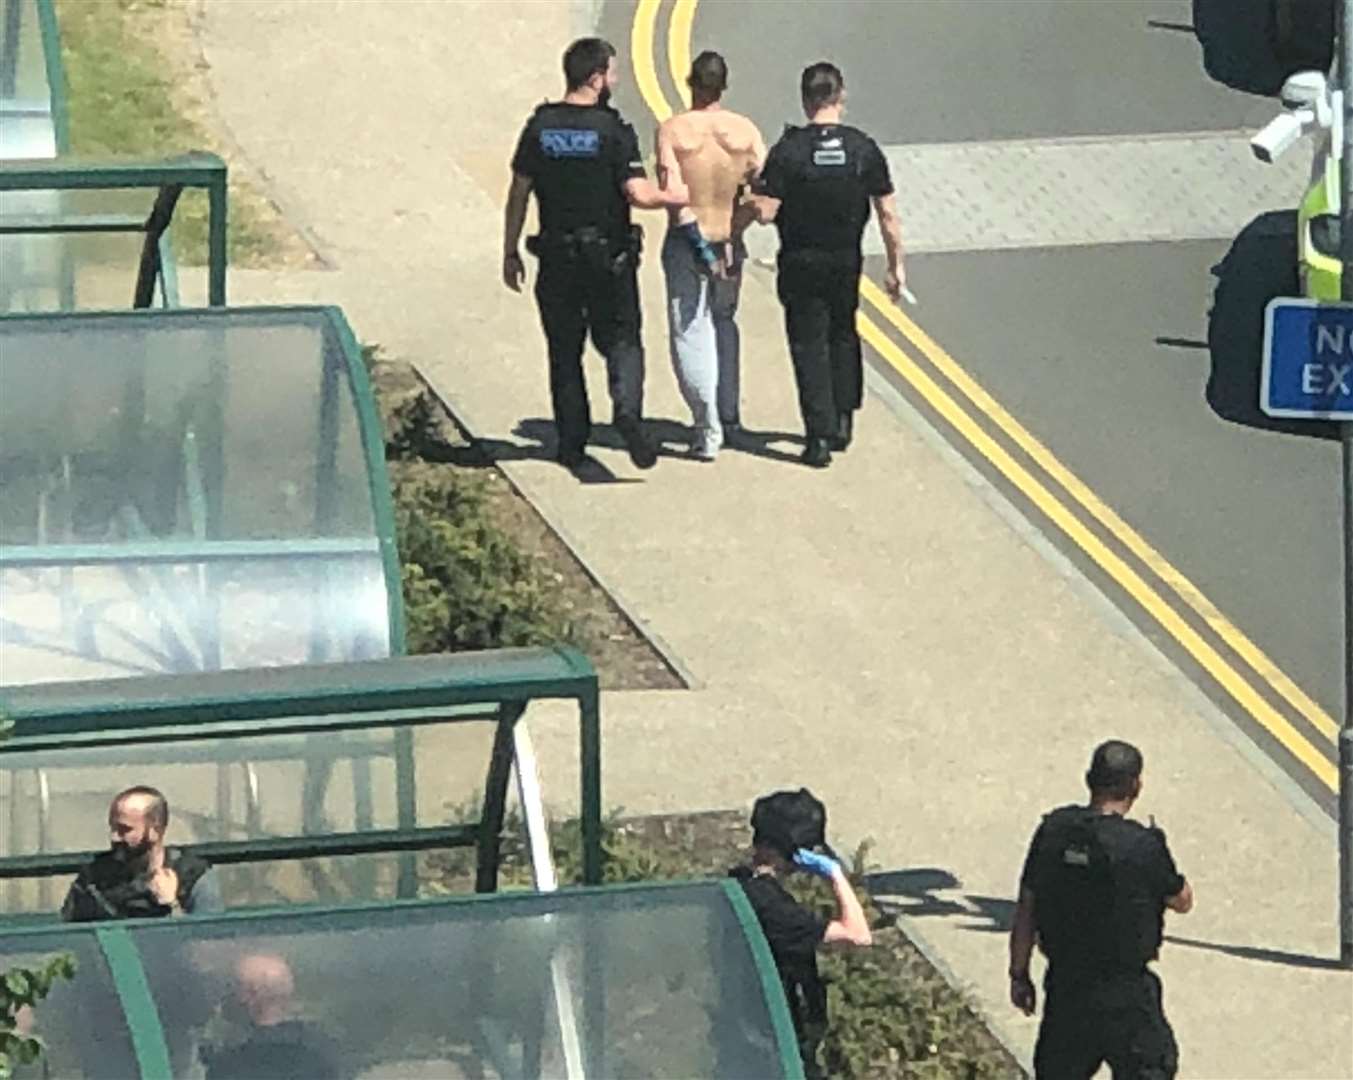 The hoaxer was arrested near MidKent College in Gillingham